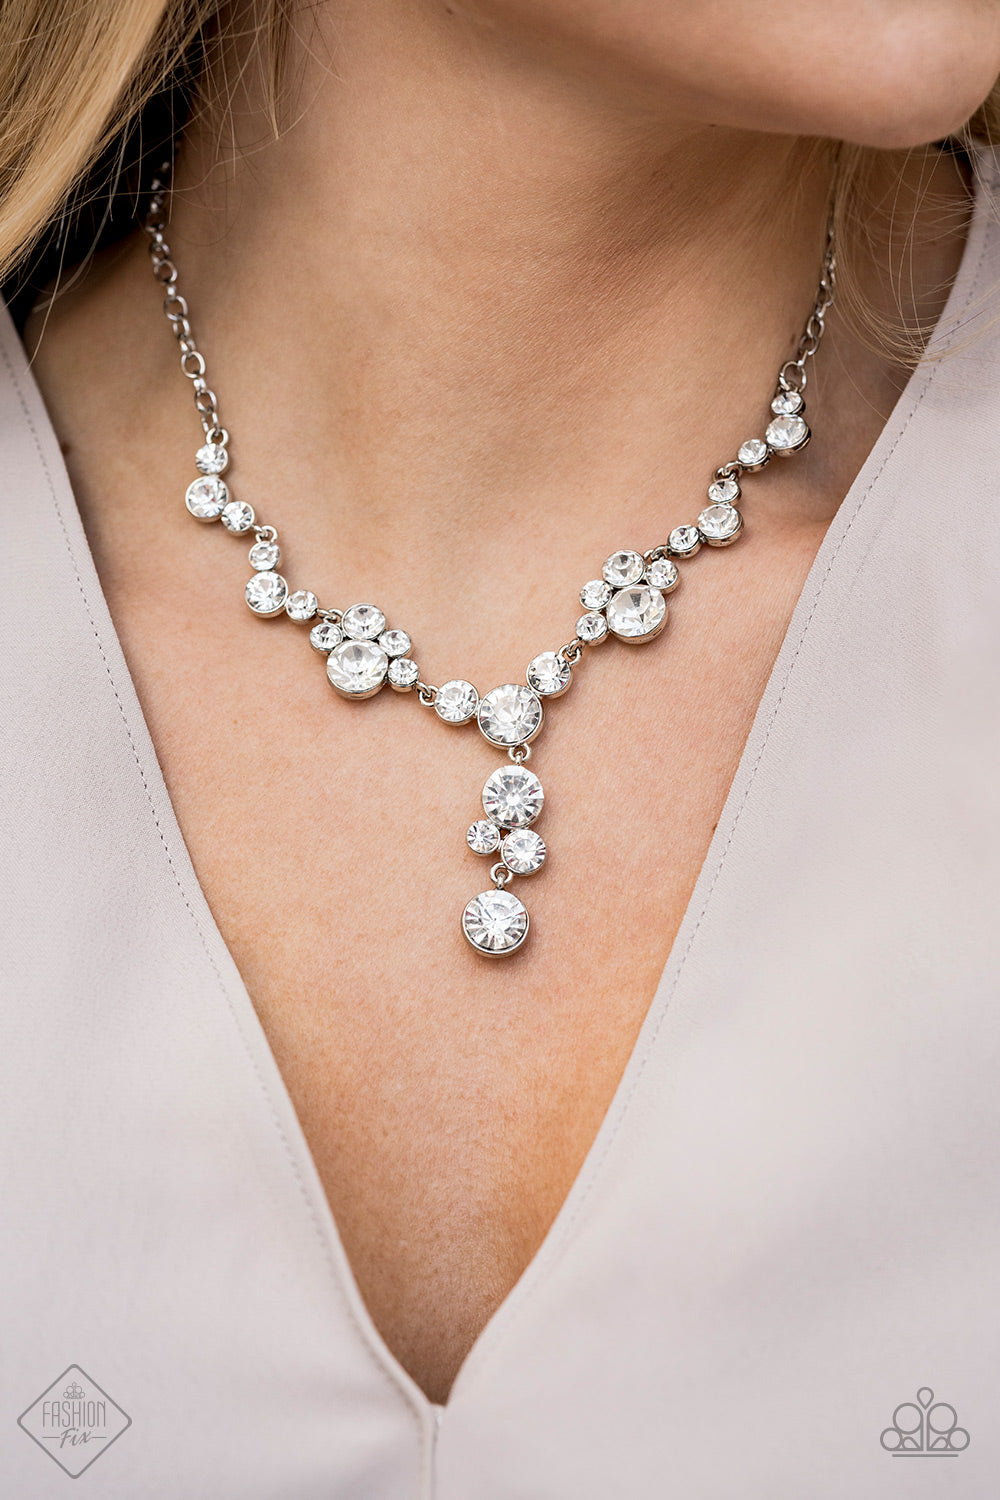 Paparazzi Accessories  - Inner Light Fashion Fix White Necklace February 2020